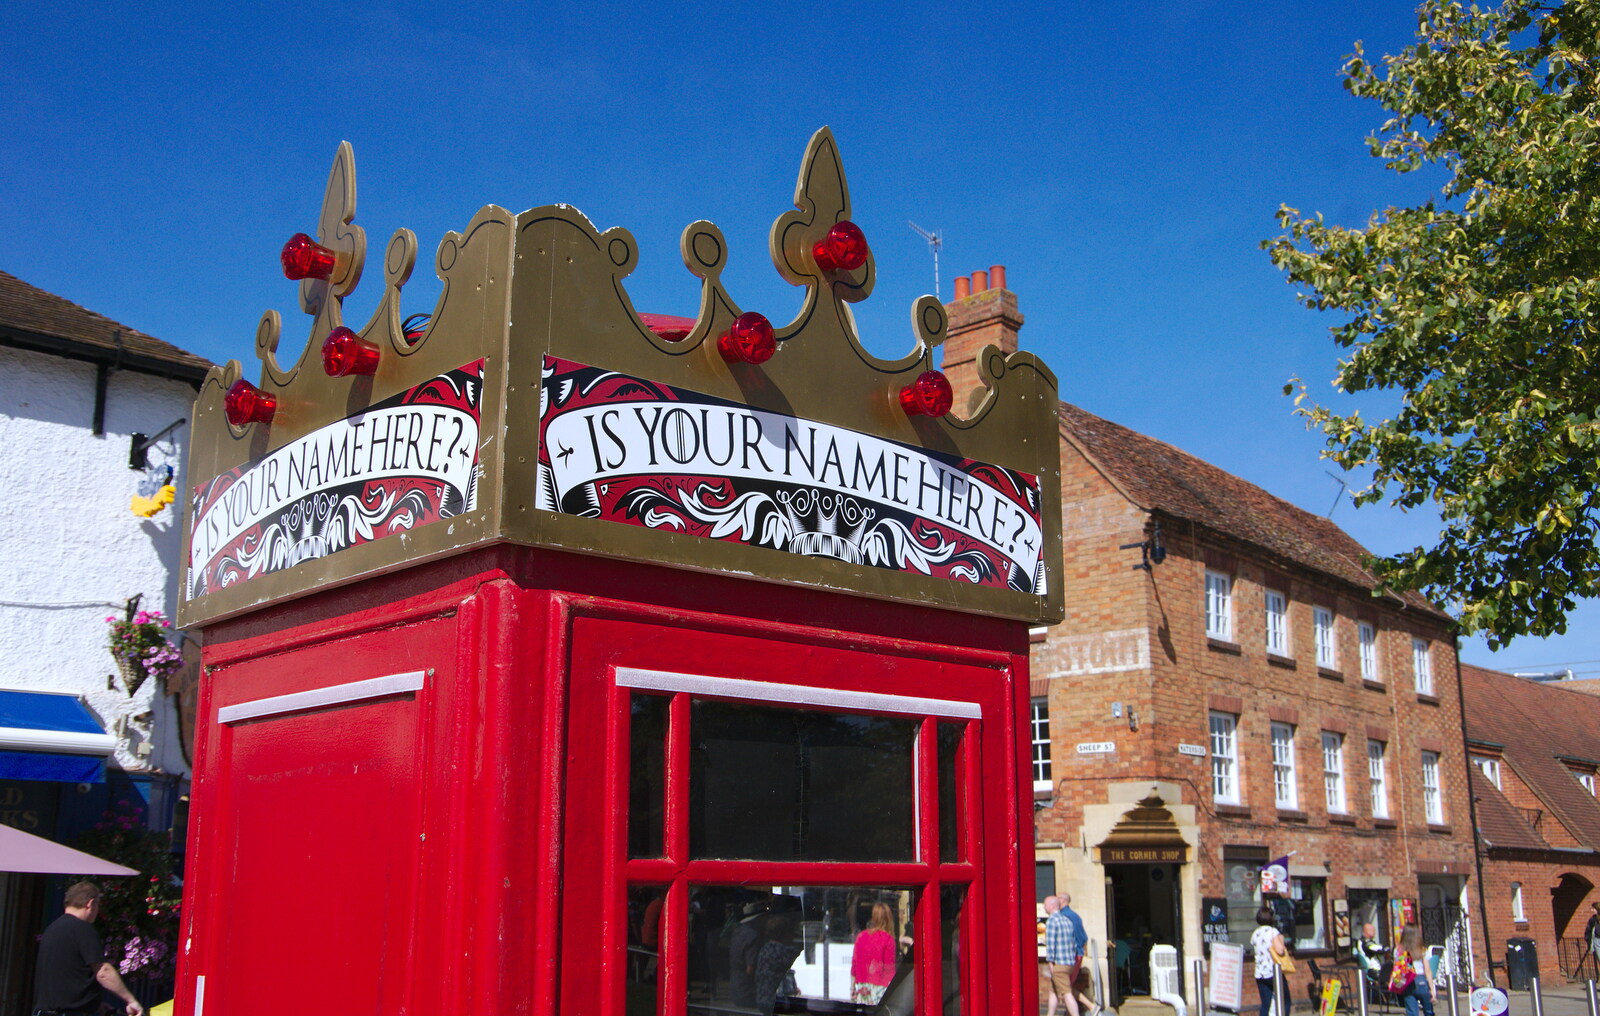 A strangely-crowned K6 phone box on Waterside from A Boat Trip on the River, Stratford upon Avon, Warwickshire - 14th September 2019